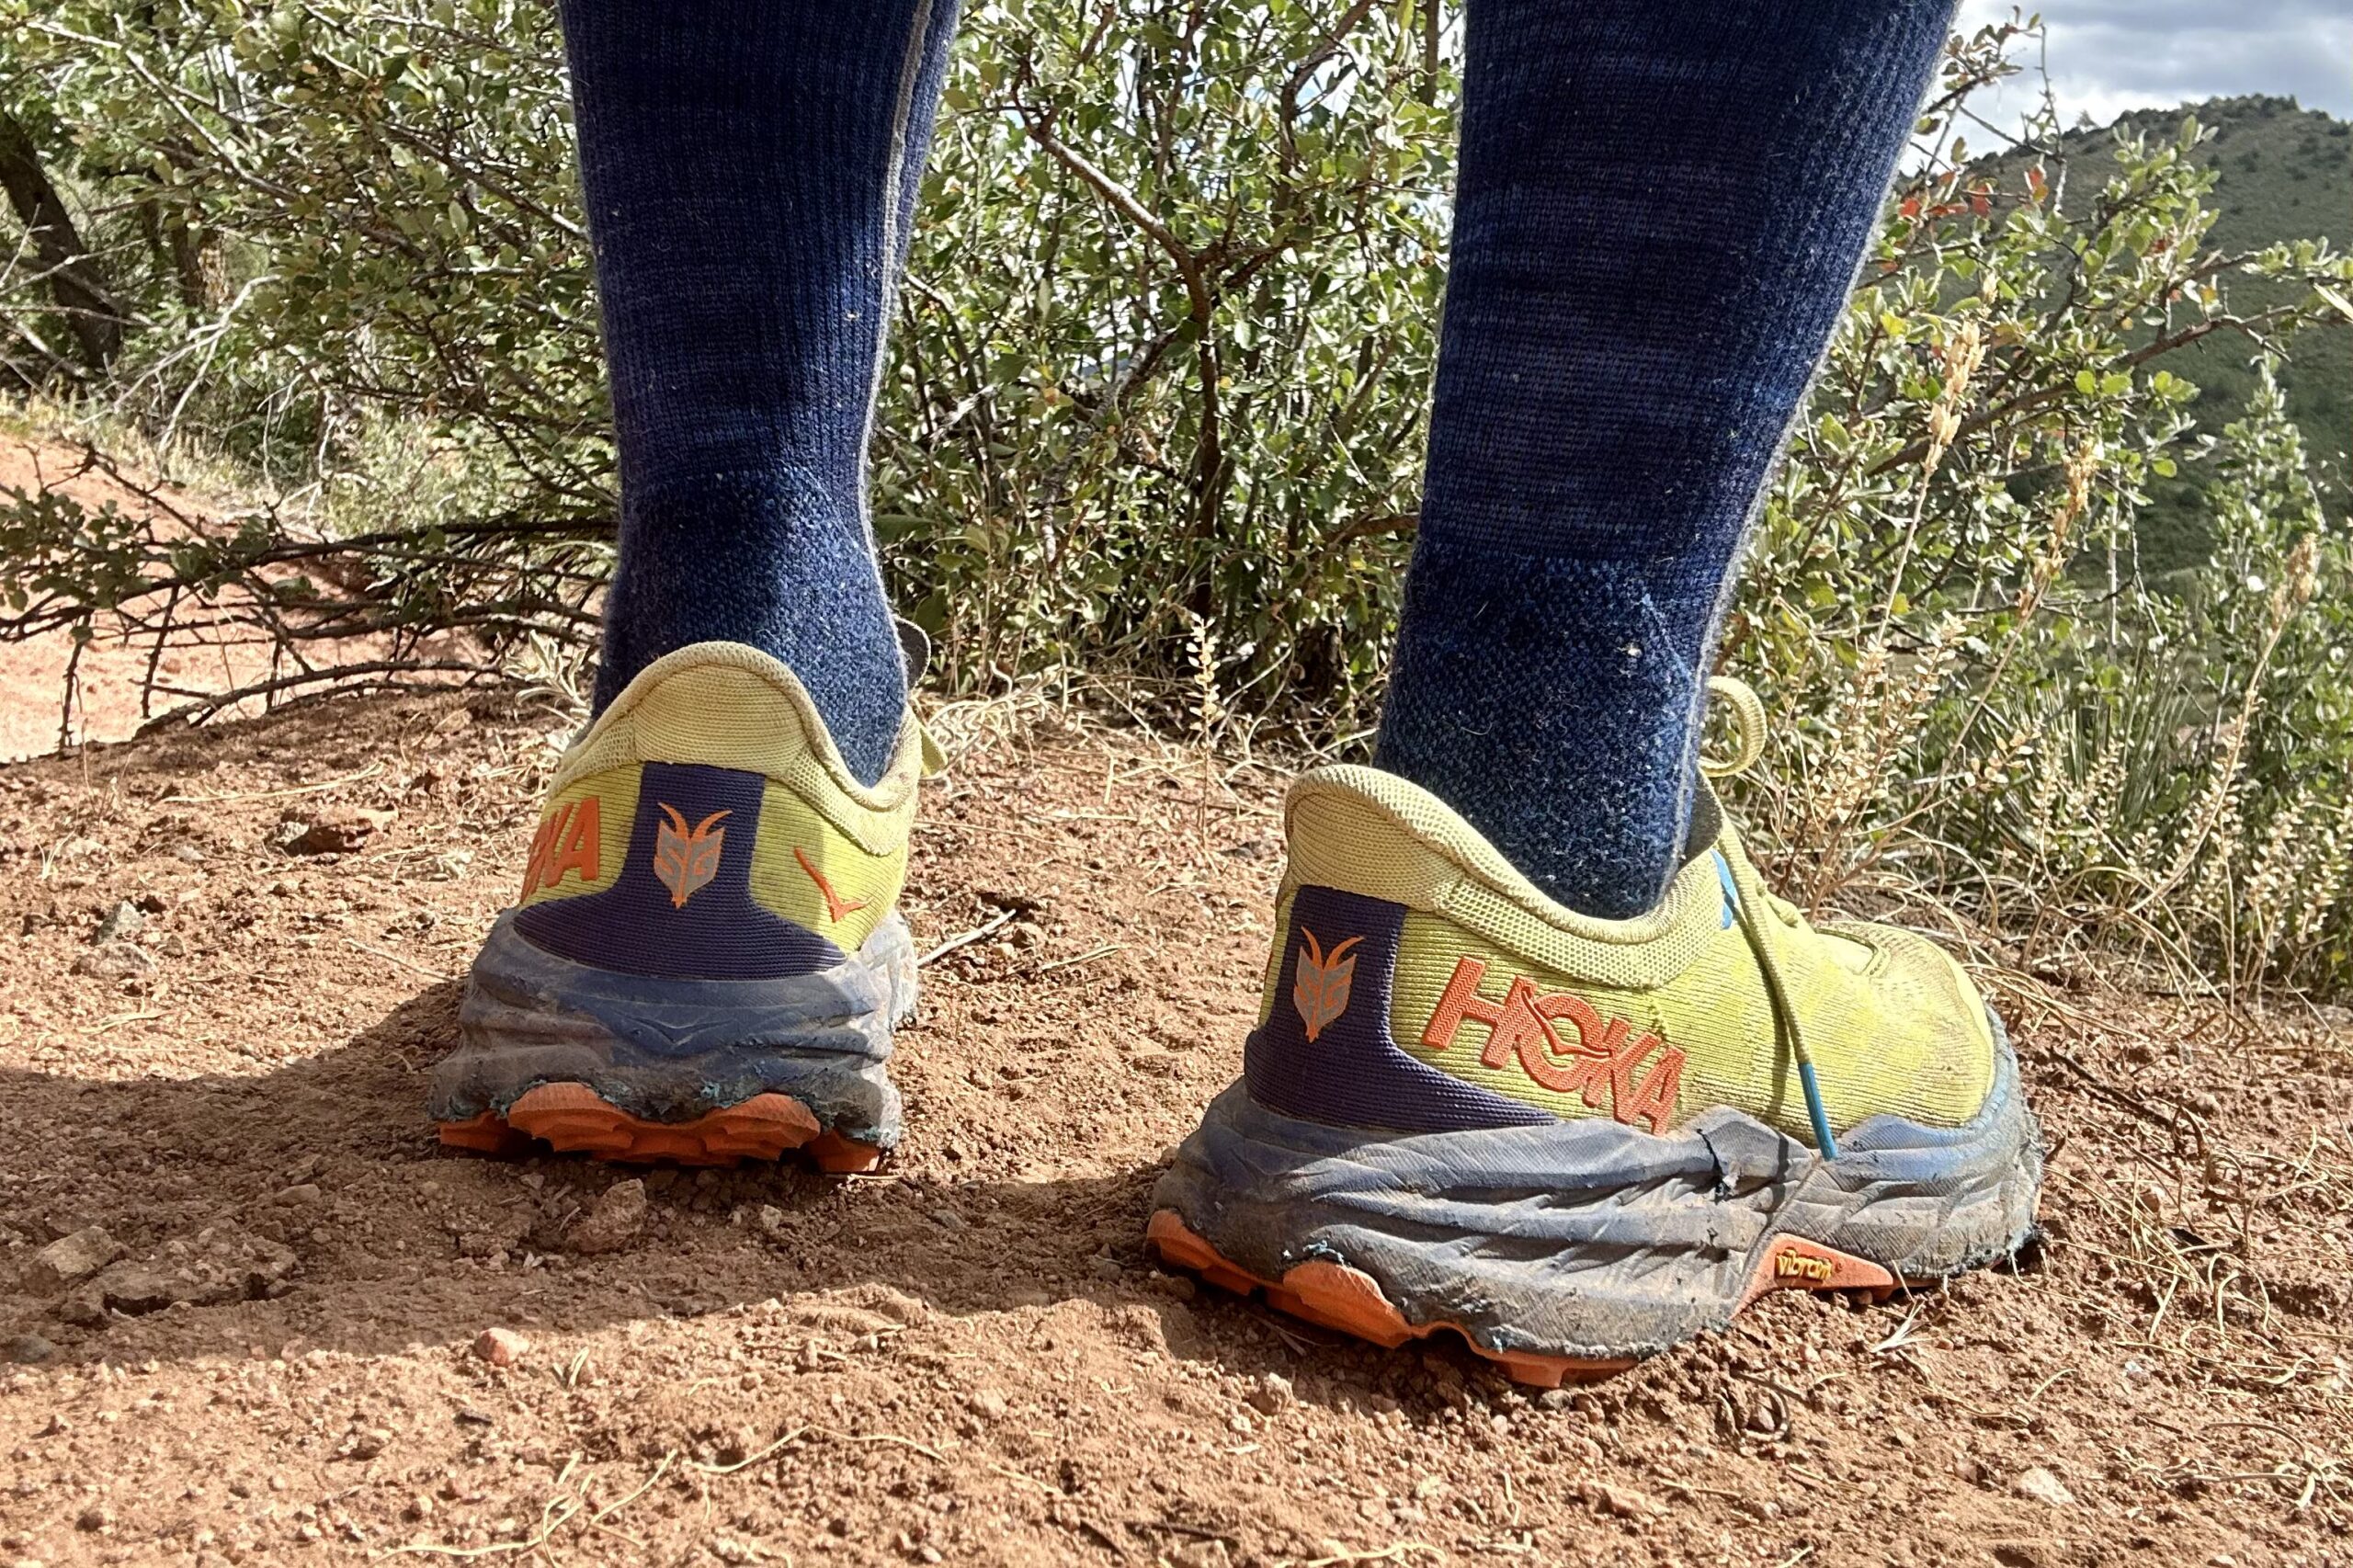 Closeup of trail running shoes from the knees down in a desert setting.